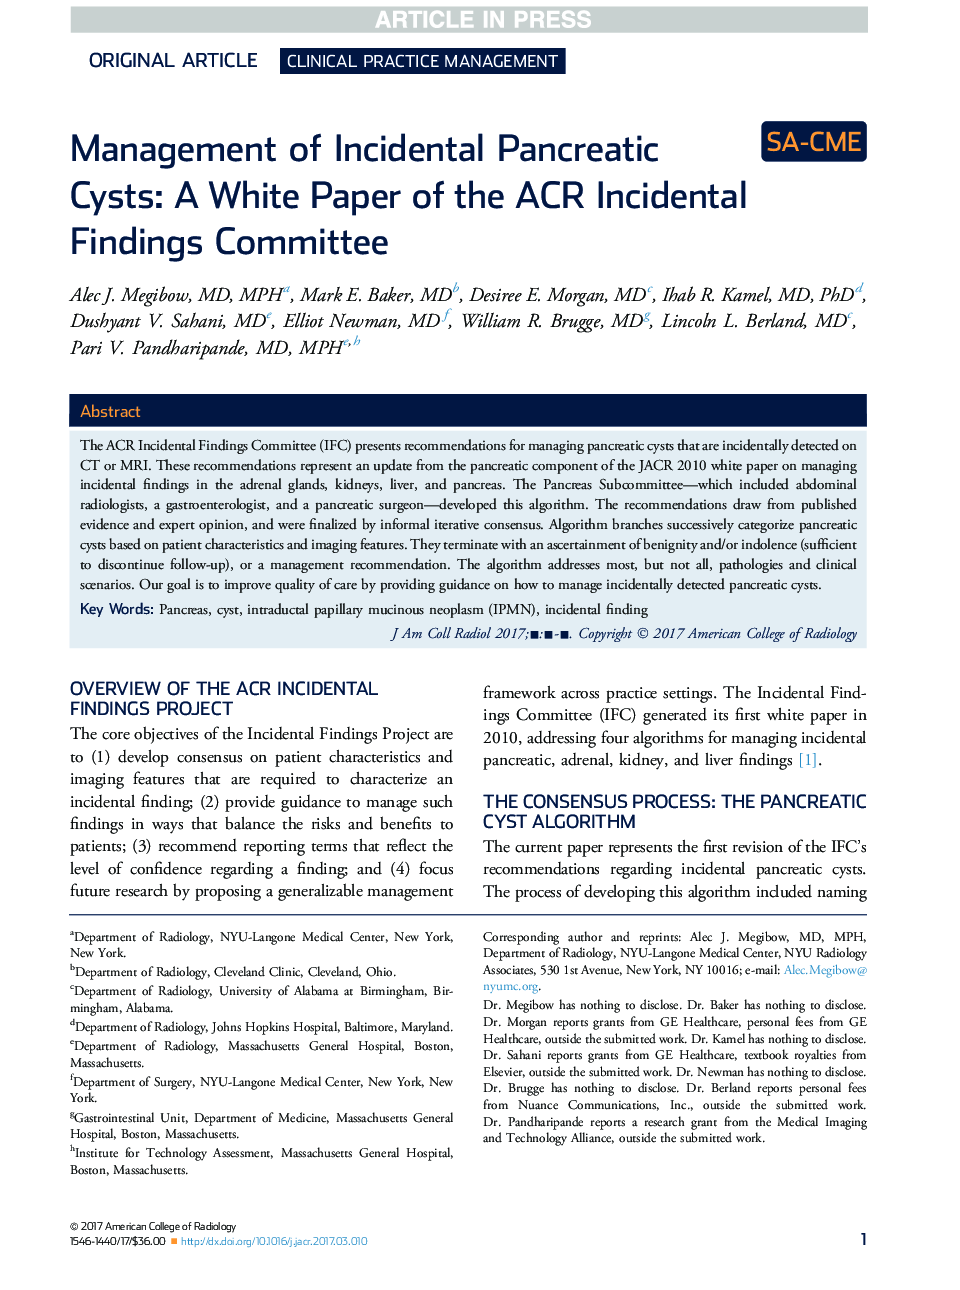 Management of Incidental Pancreatic Cysts: A White Paper of the ACR Incidental Findings Committee